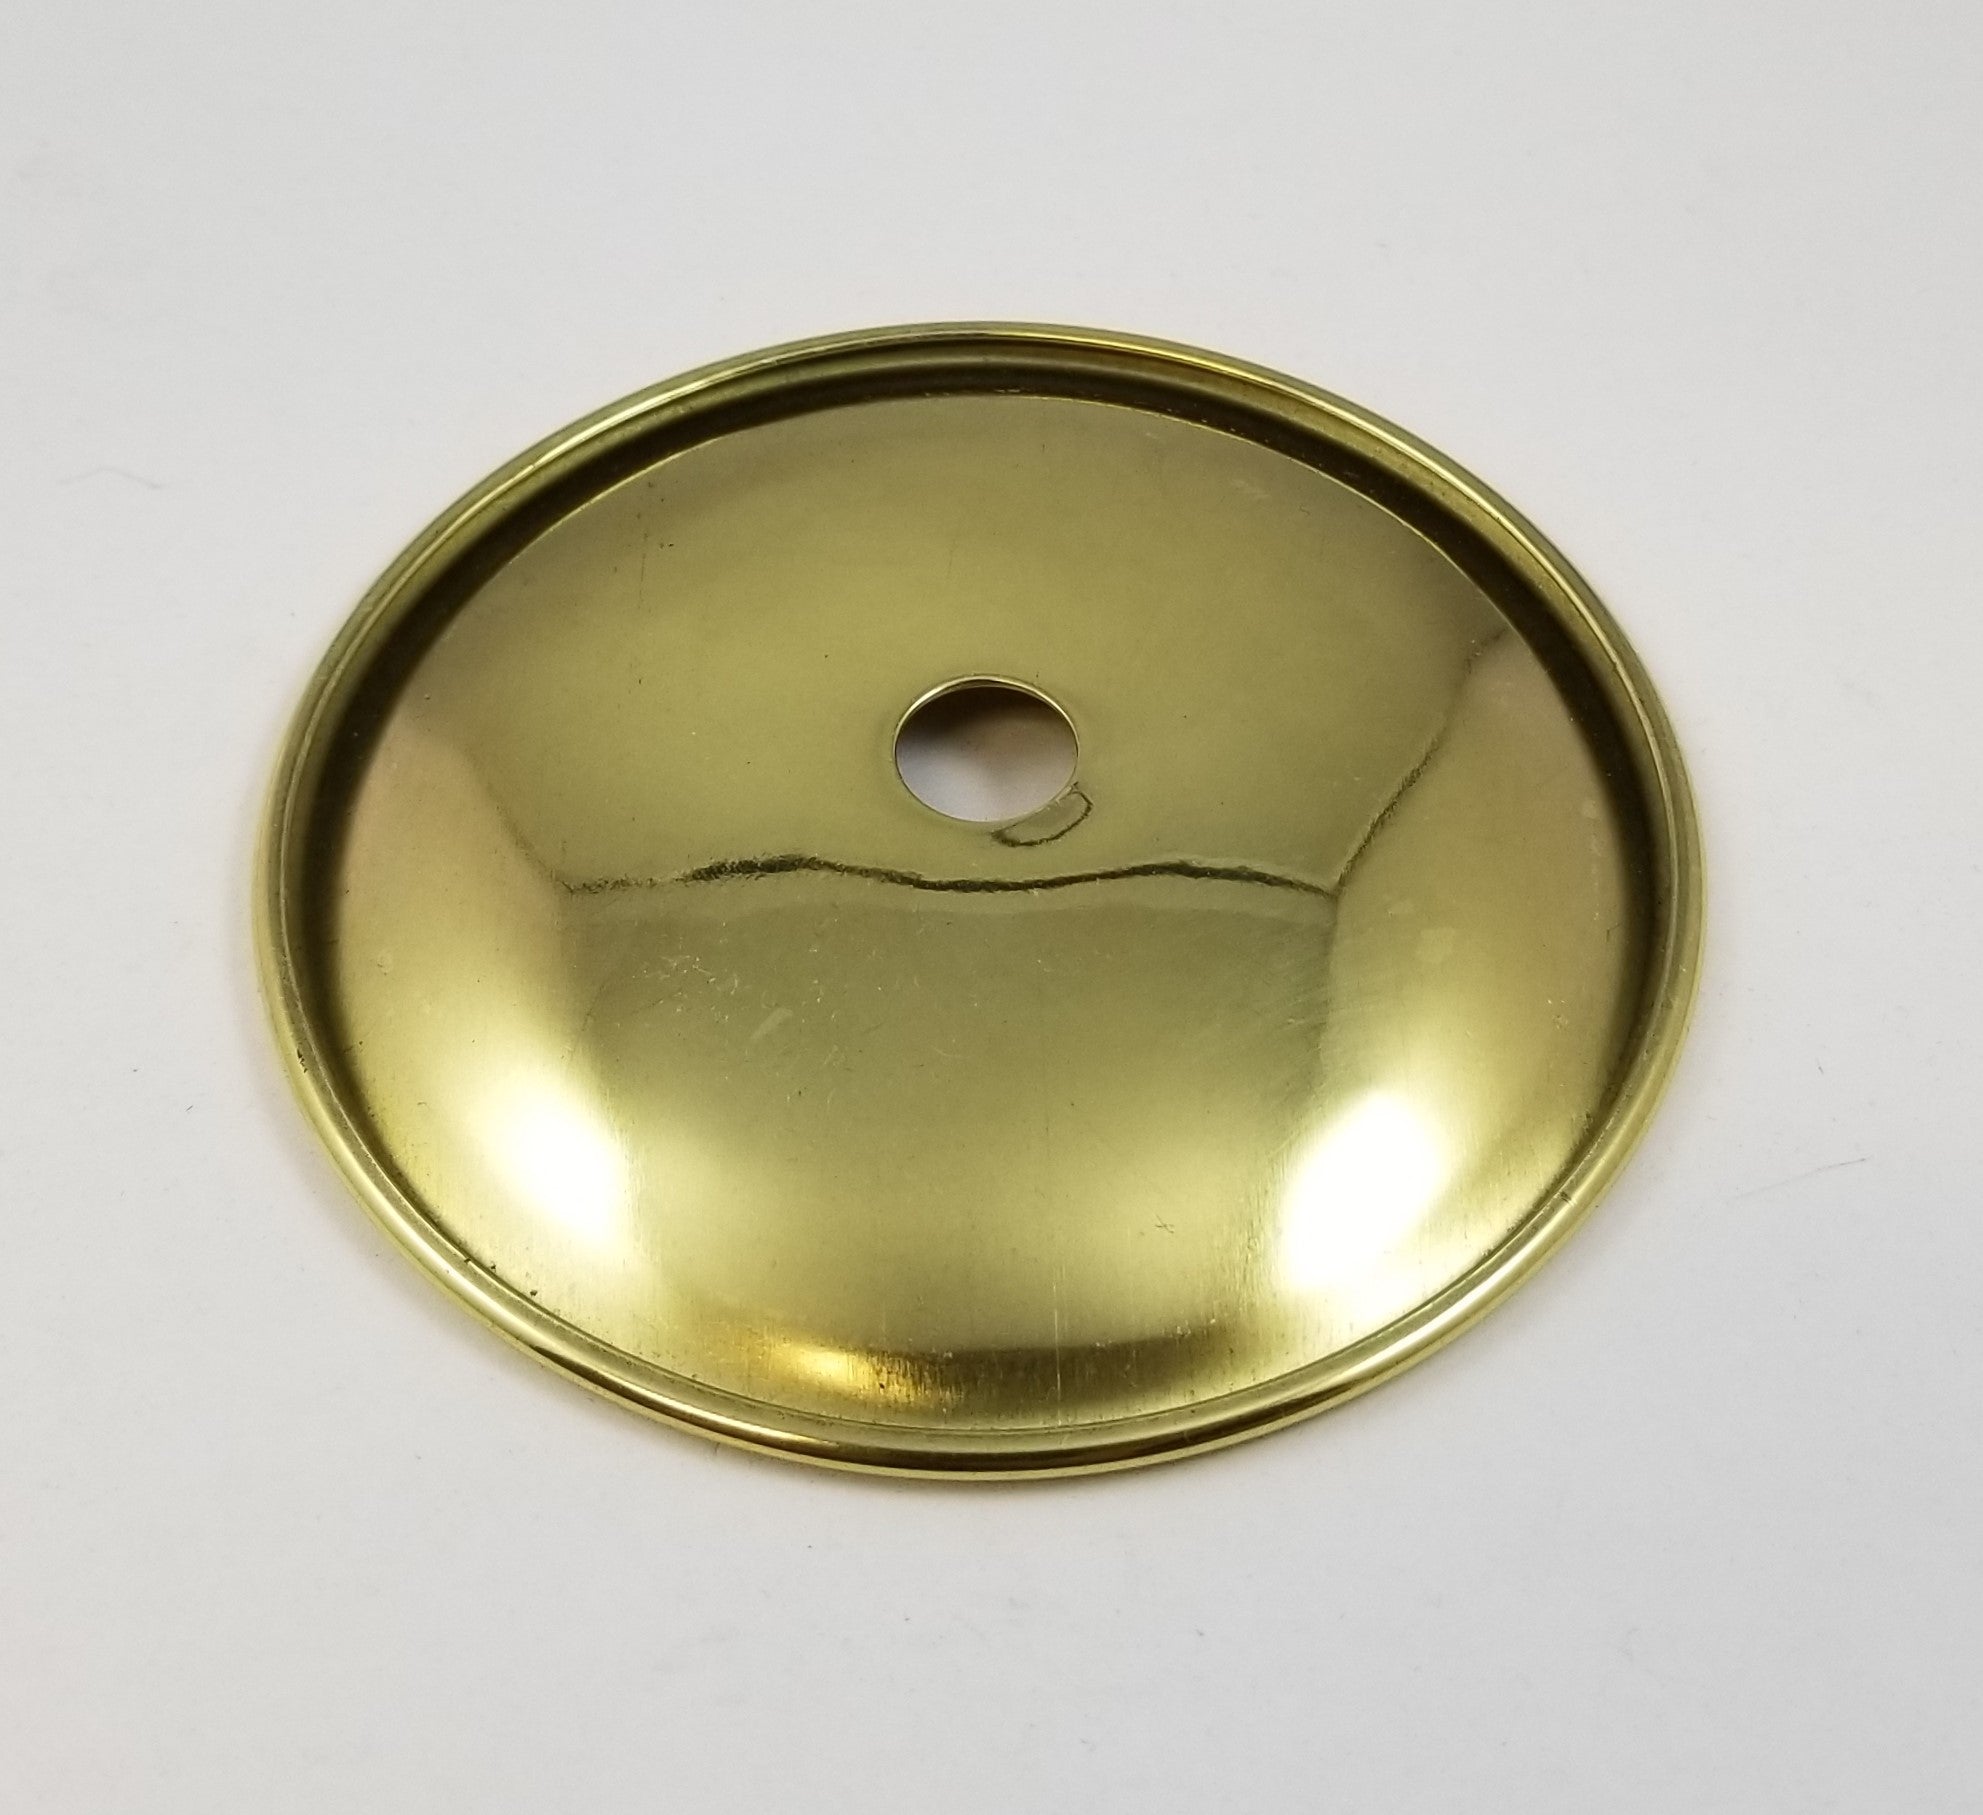 Brass Bobesche or Plate 3-1/2" Diameter - Polished & Lacquered